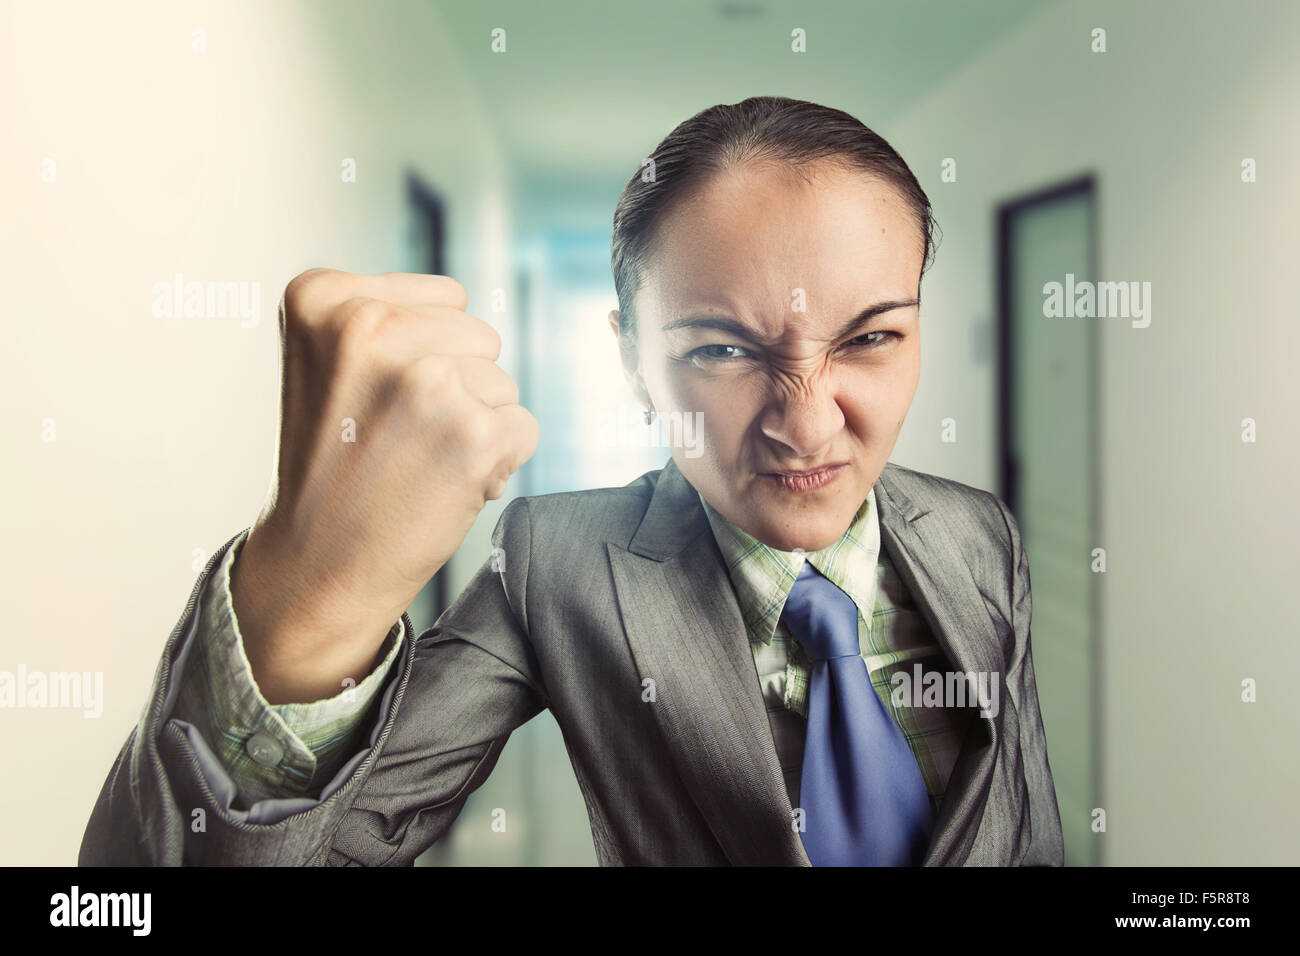 Angry irritated woman clenching her fist in the office Stock Photo